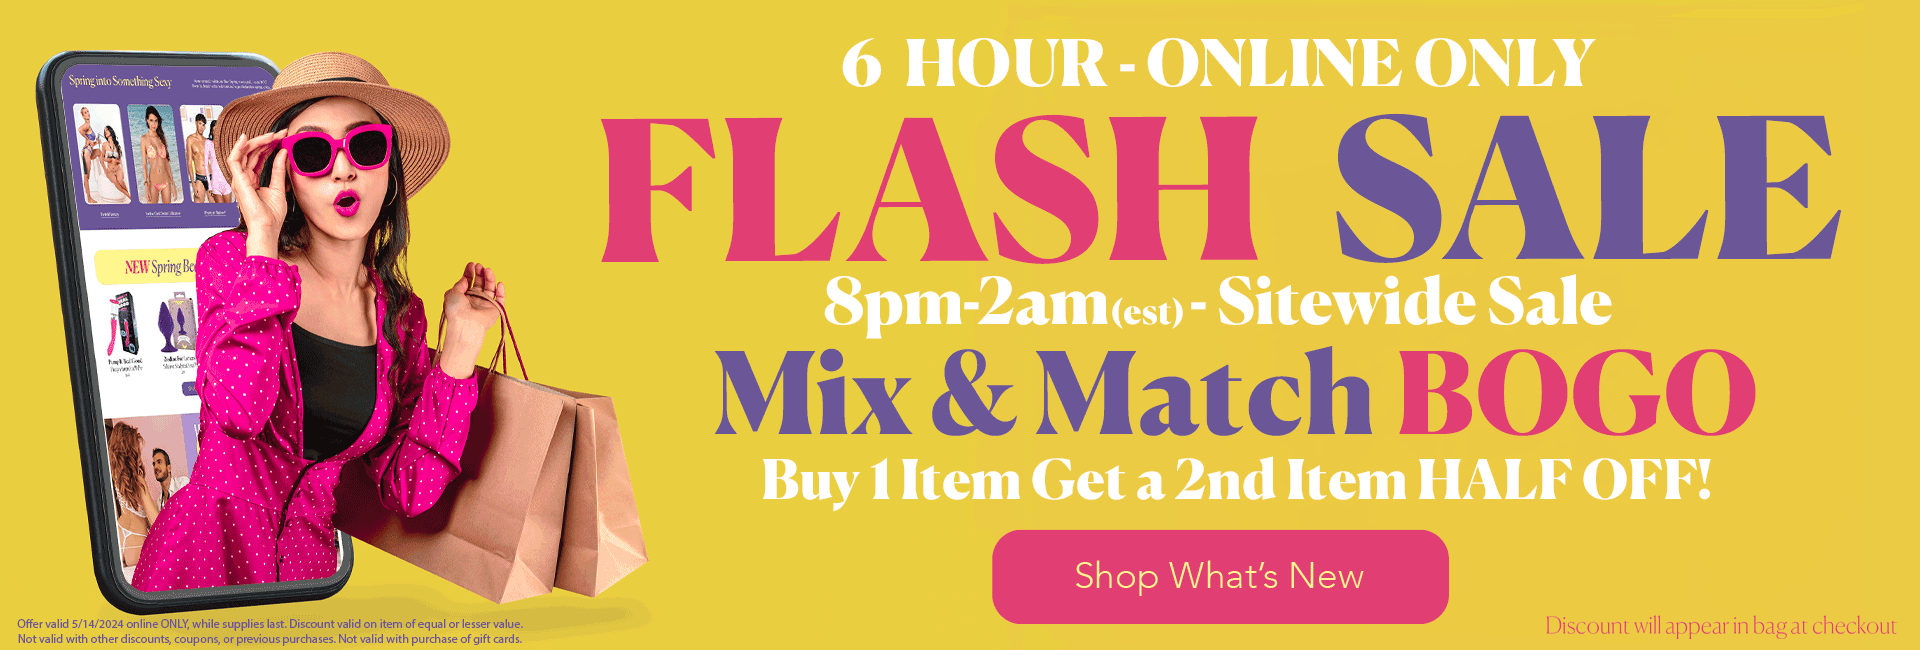 6 Hour - Online ONLY - FLASH SALE - sitewide Mix and Match - BOGO Buy 1 item, get the 2nd HALF OFF!